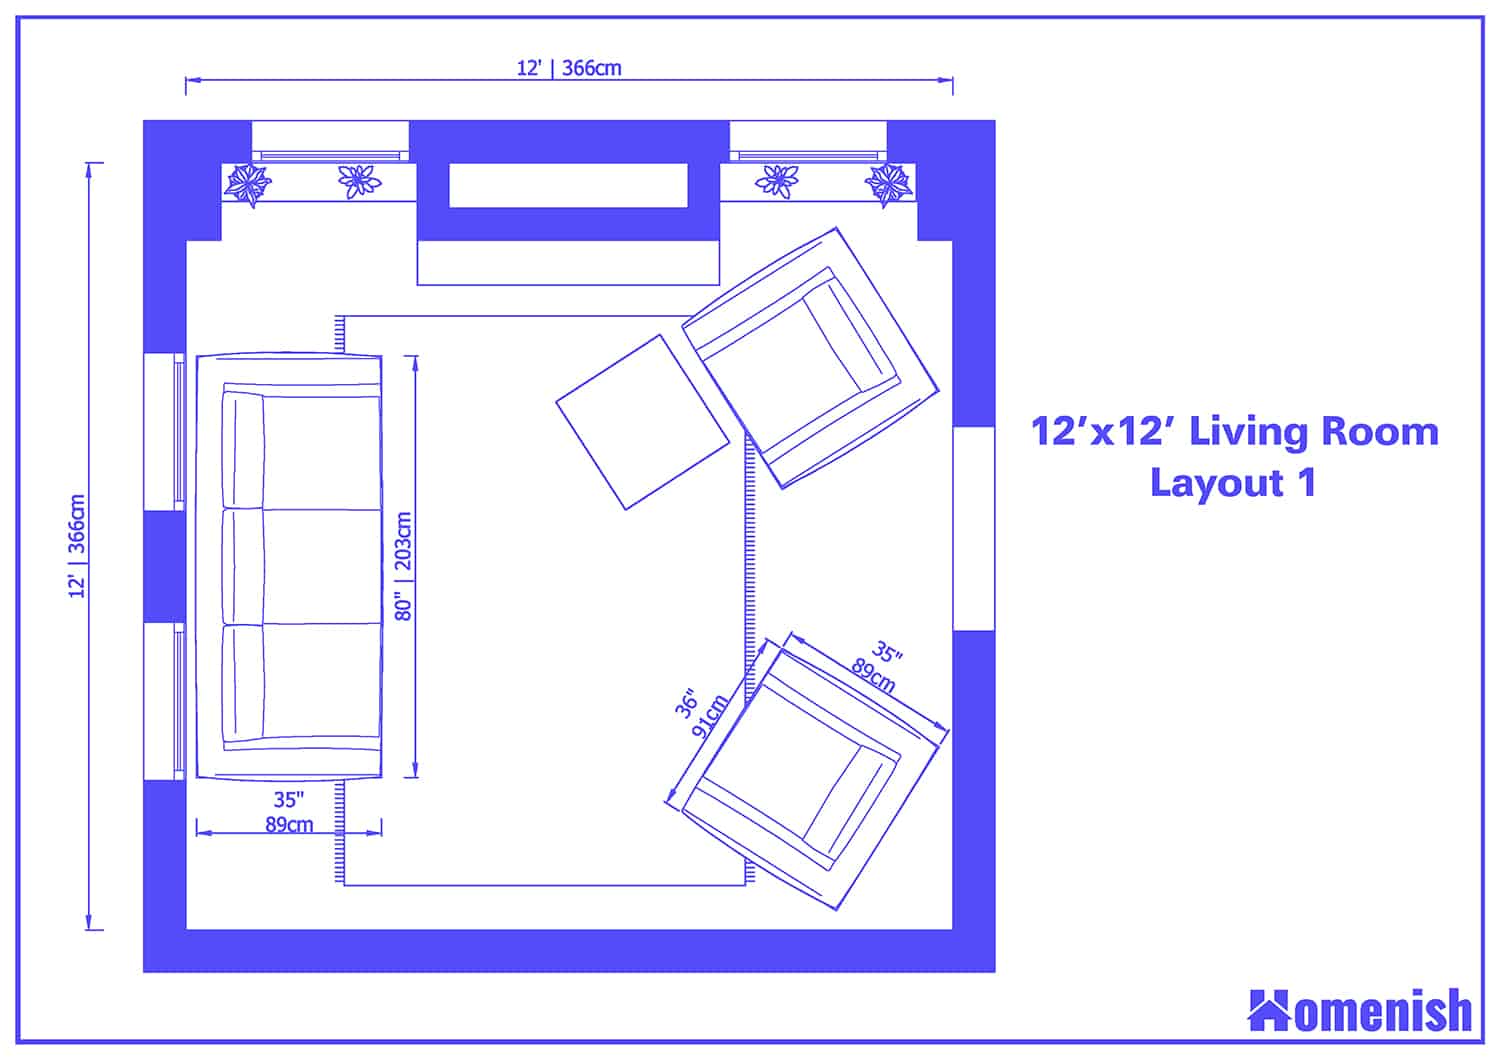 square 12x12 living room layout